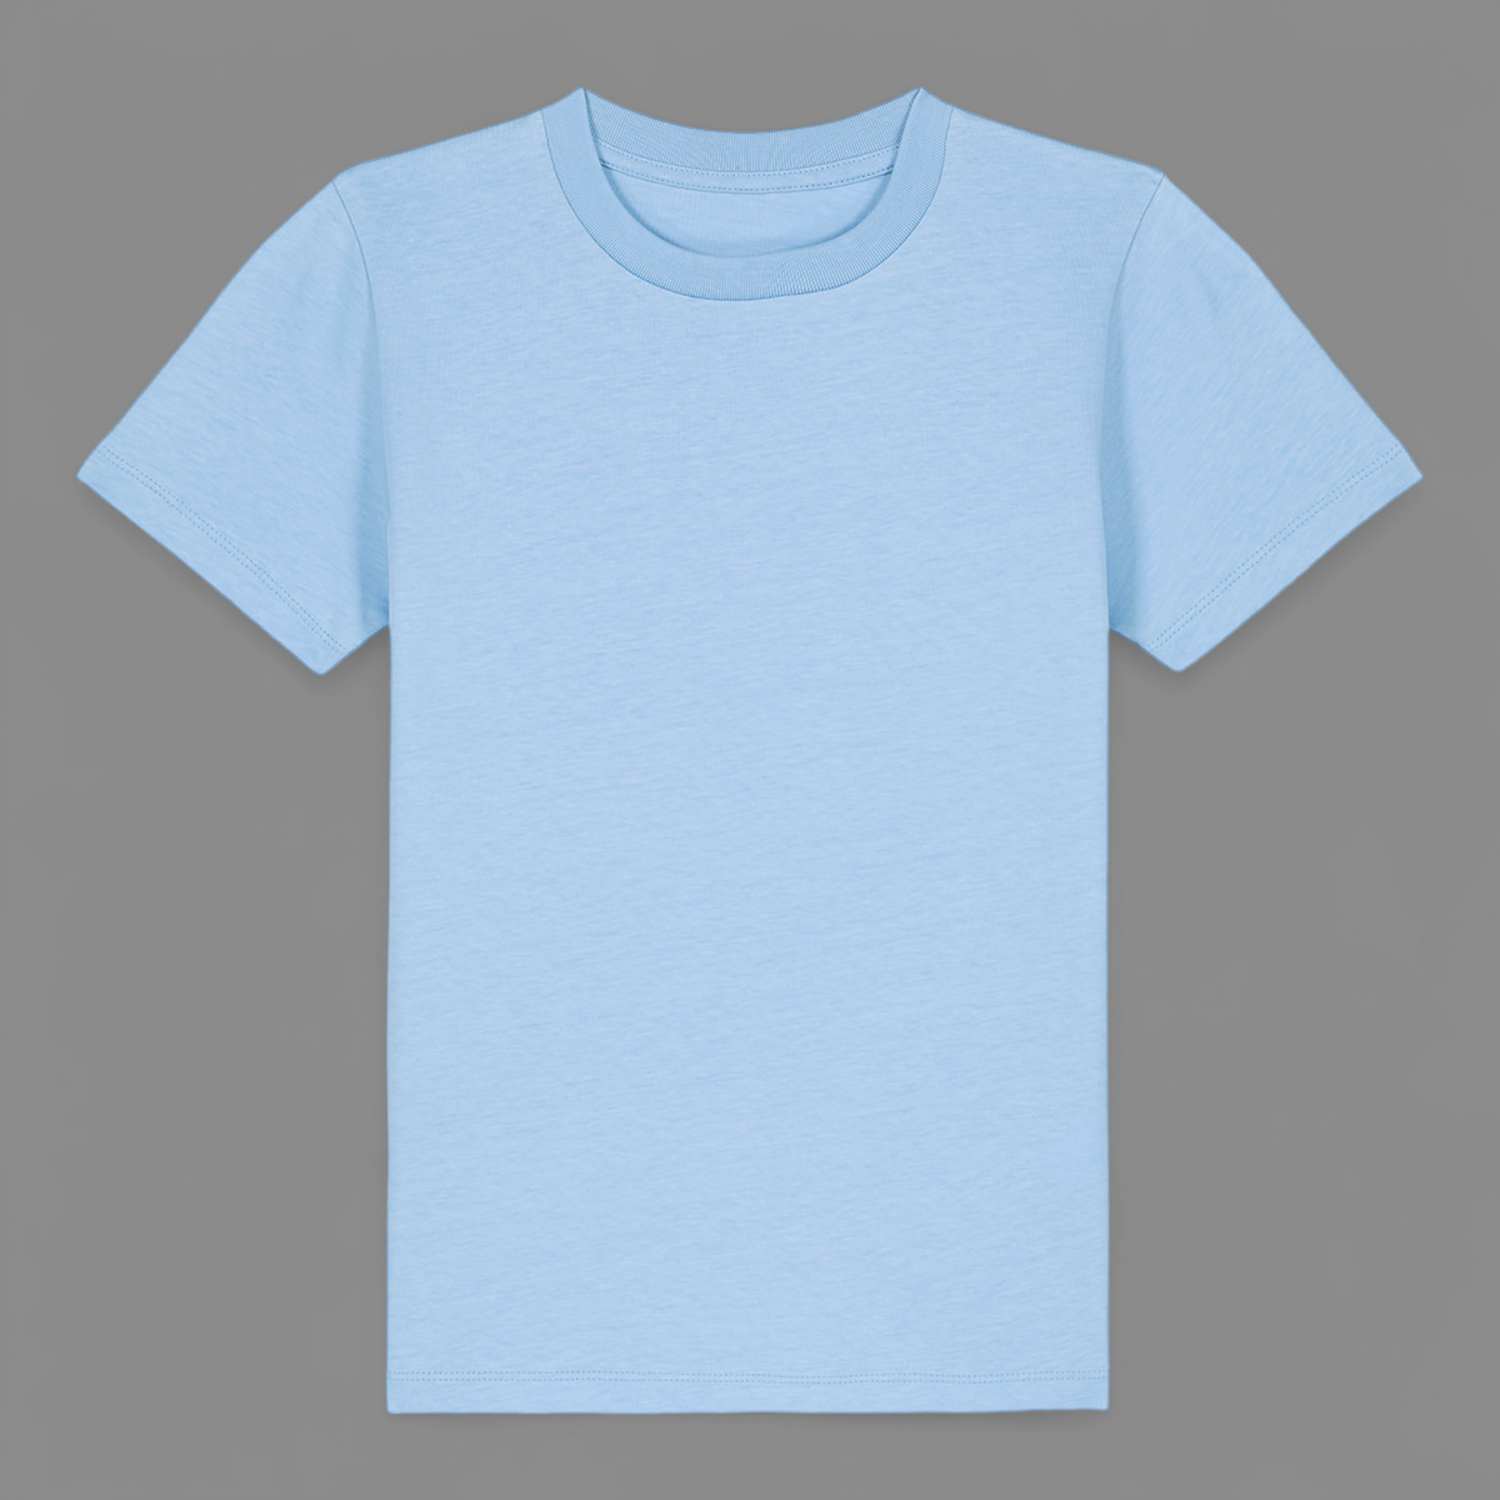 Children's T-Shirt - Create Your Own